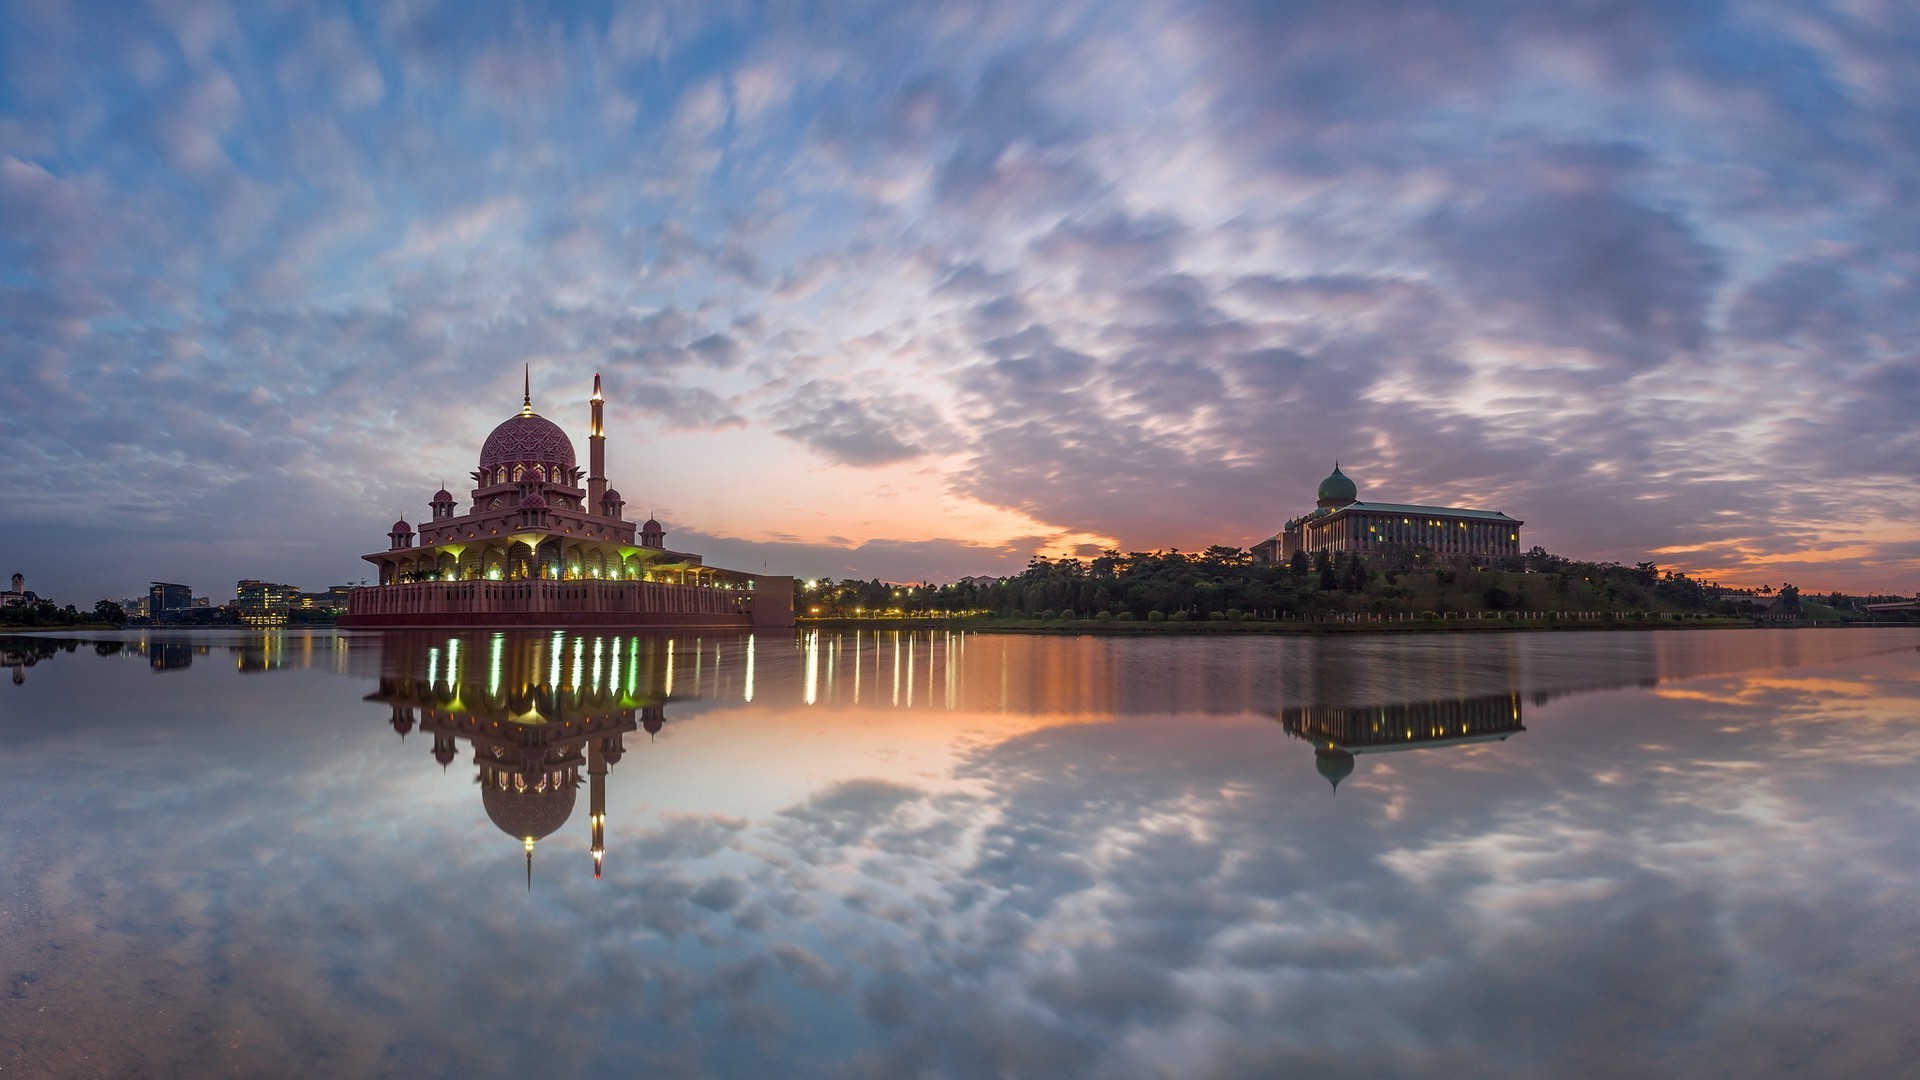 nature, Landscape, Architecture, Building, Water, Trees, Malaysia, Kuala Lumpur, Mosques, Lights, Forest, Sunset, Reflection, City, Modern, Tower, Long Exposure Wallpaper